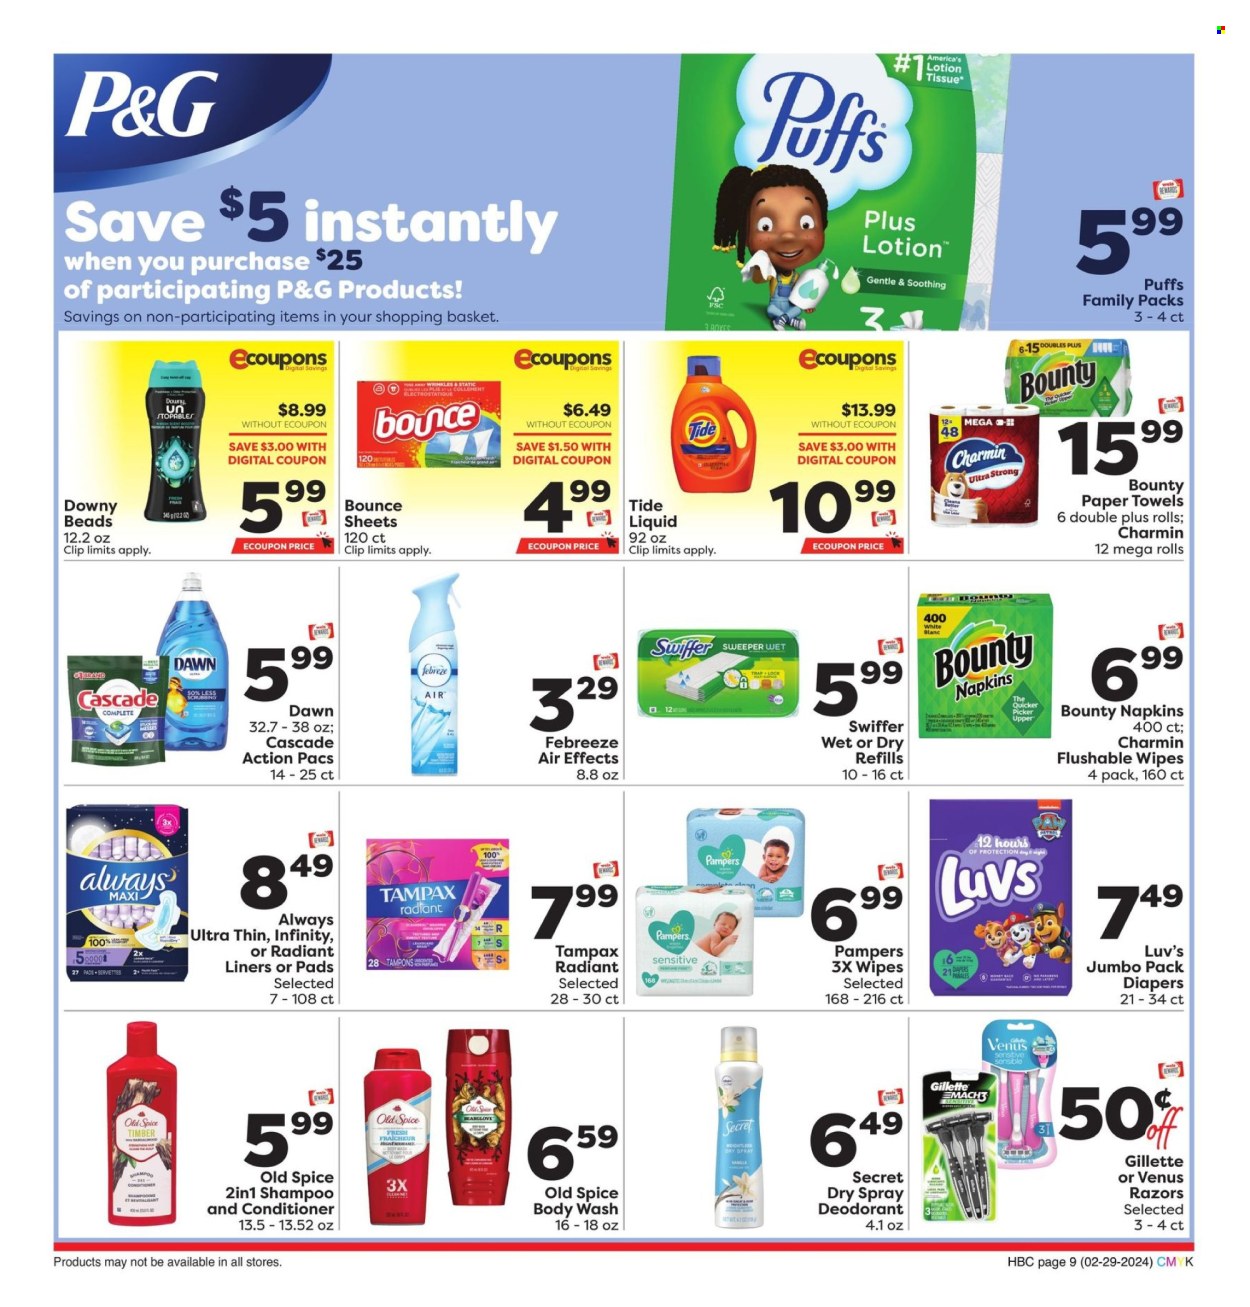 Weis ad  - 02.29.2024 - 04.03.2024.